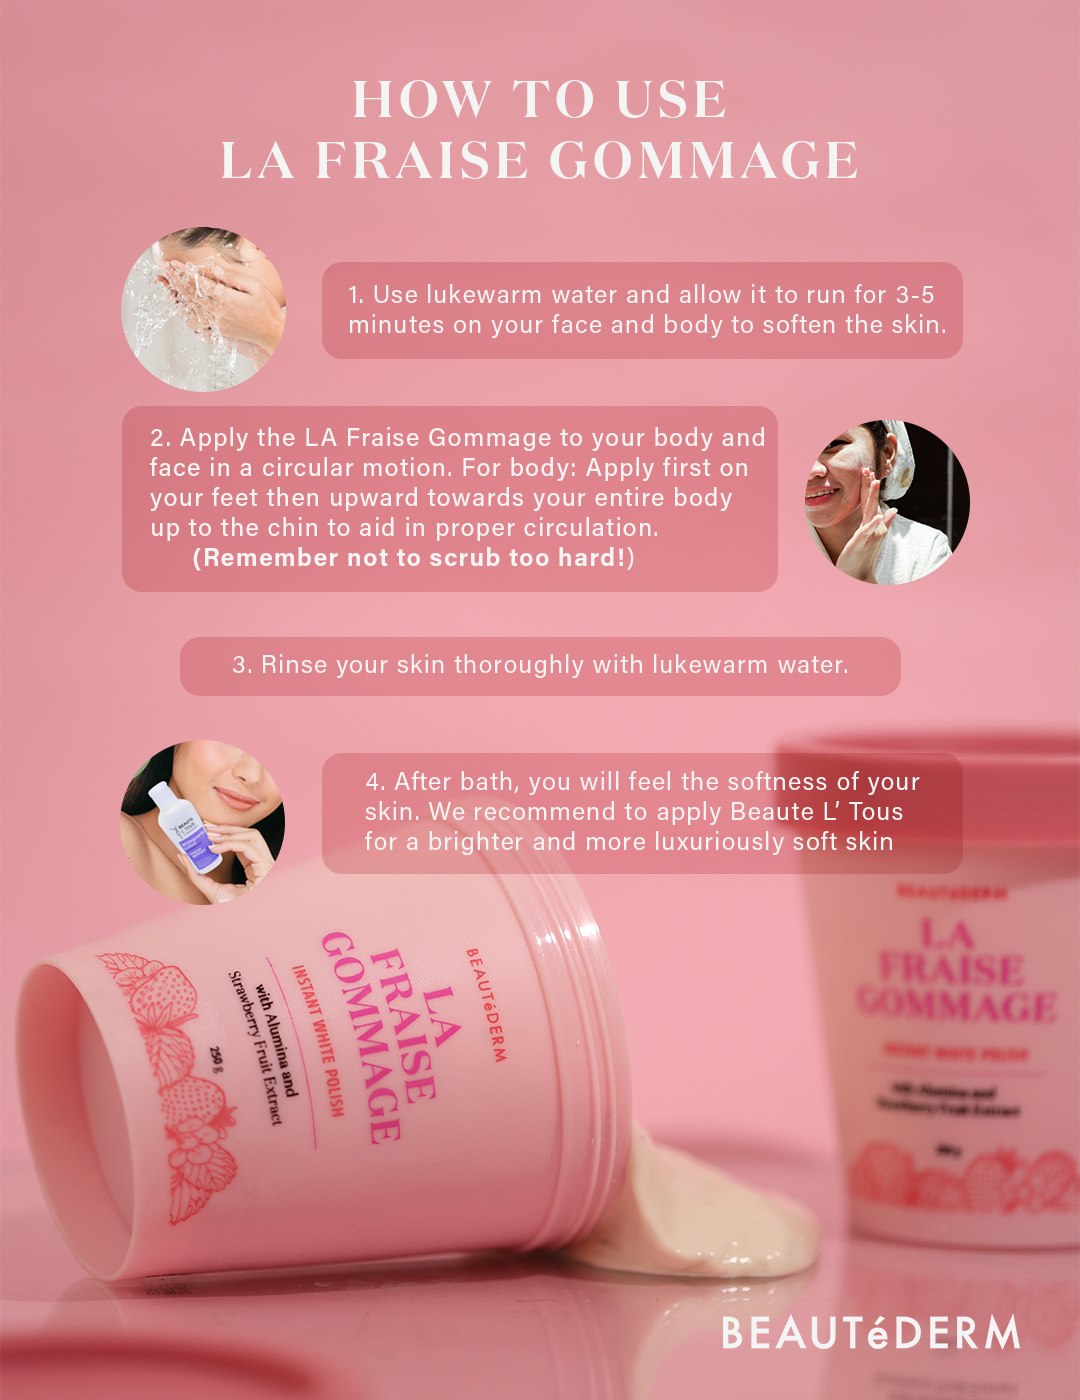 Beautederm La Fraise Gommage Instant White Polish Scrub Direction how to use